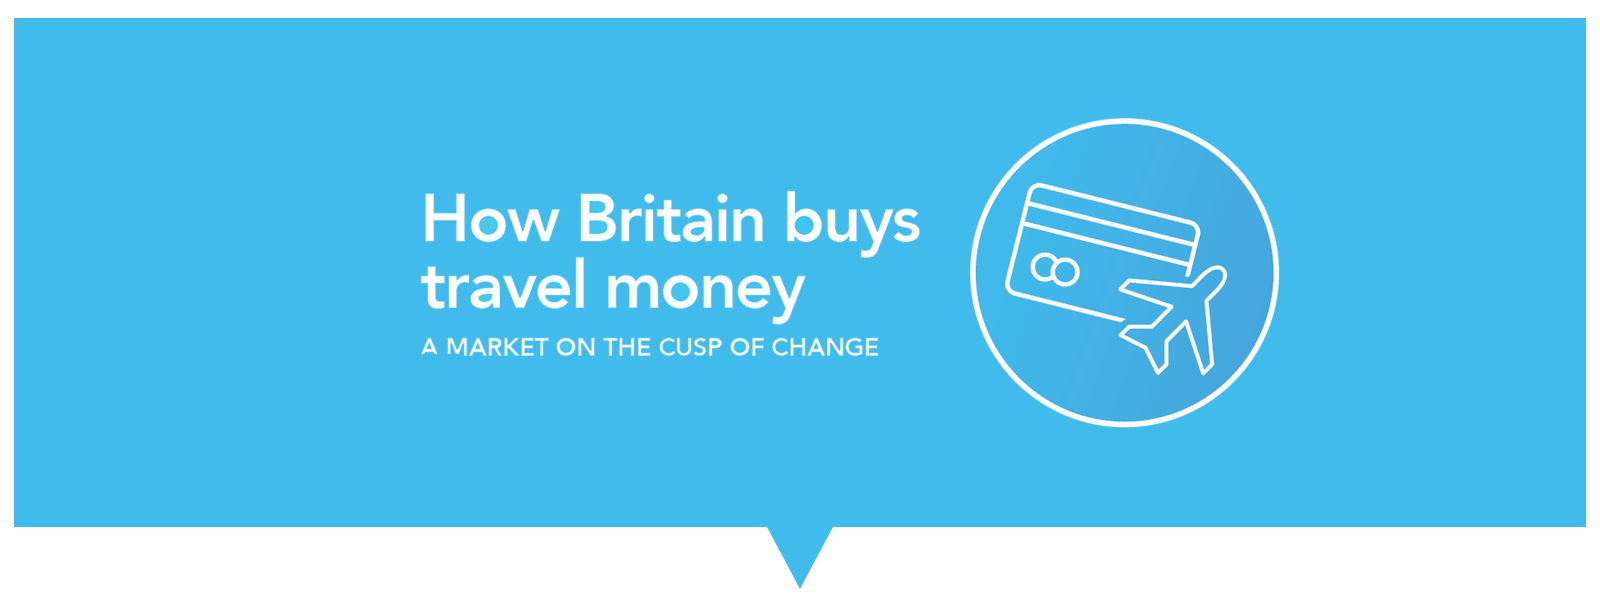 britain-buys-travel-money-infographic.png